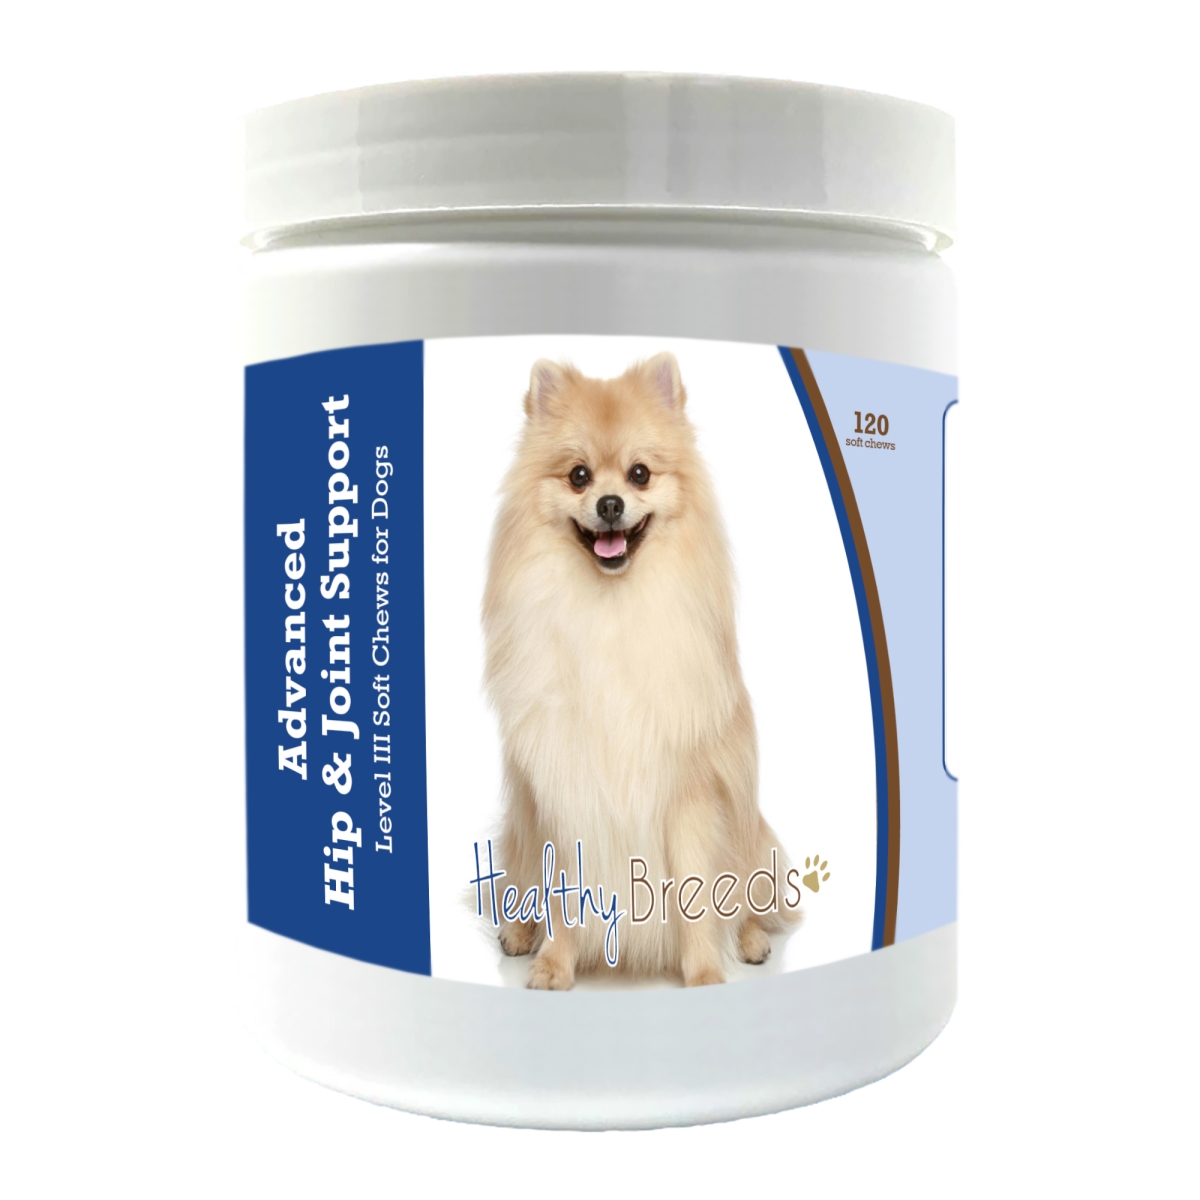 Picture of Healthy Breeds 192959898972 Pomeranian Advanced Hip & Joint Support Level III Soft Chews for Dogs